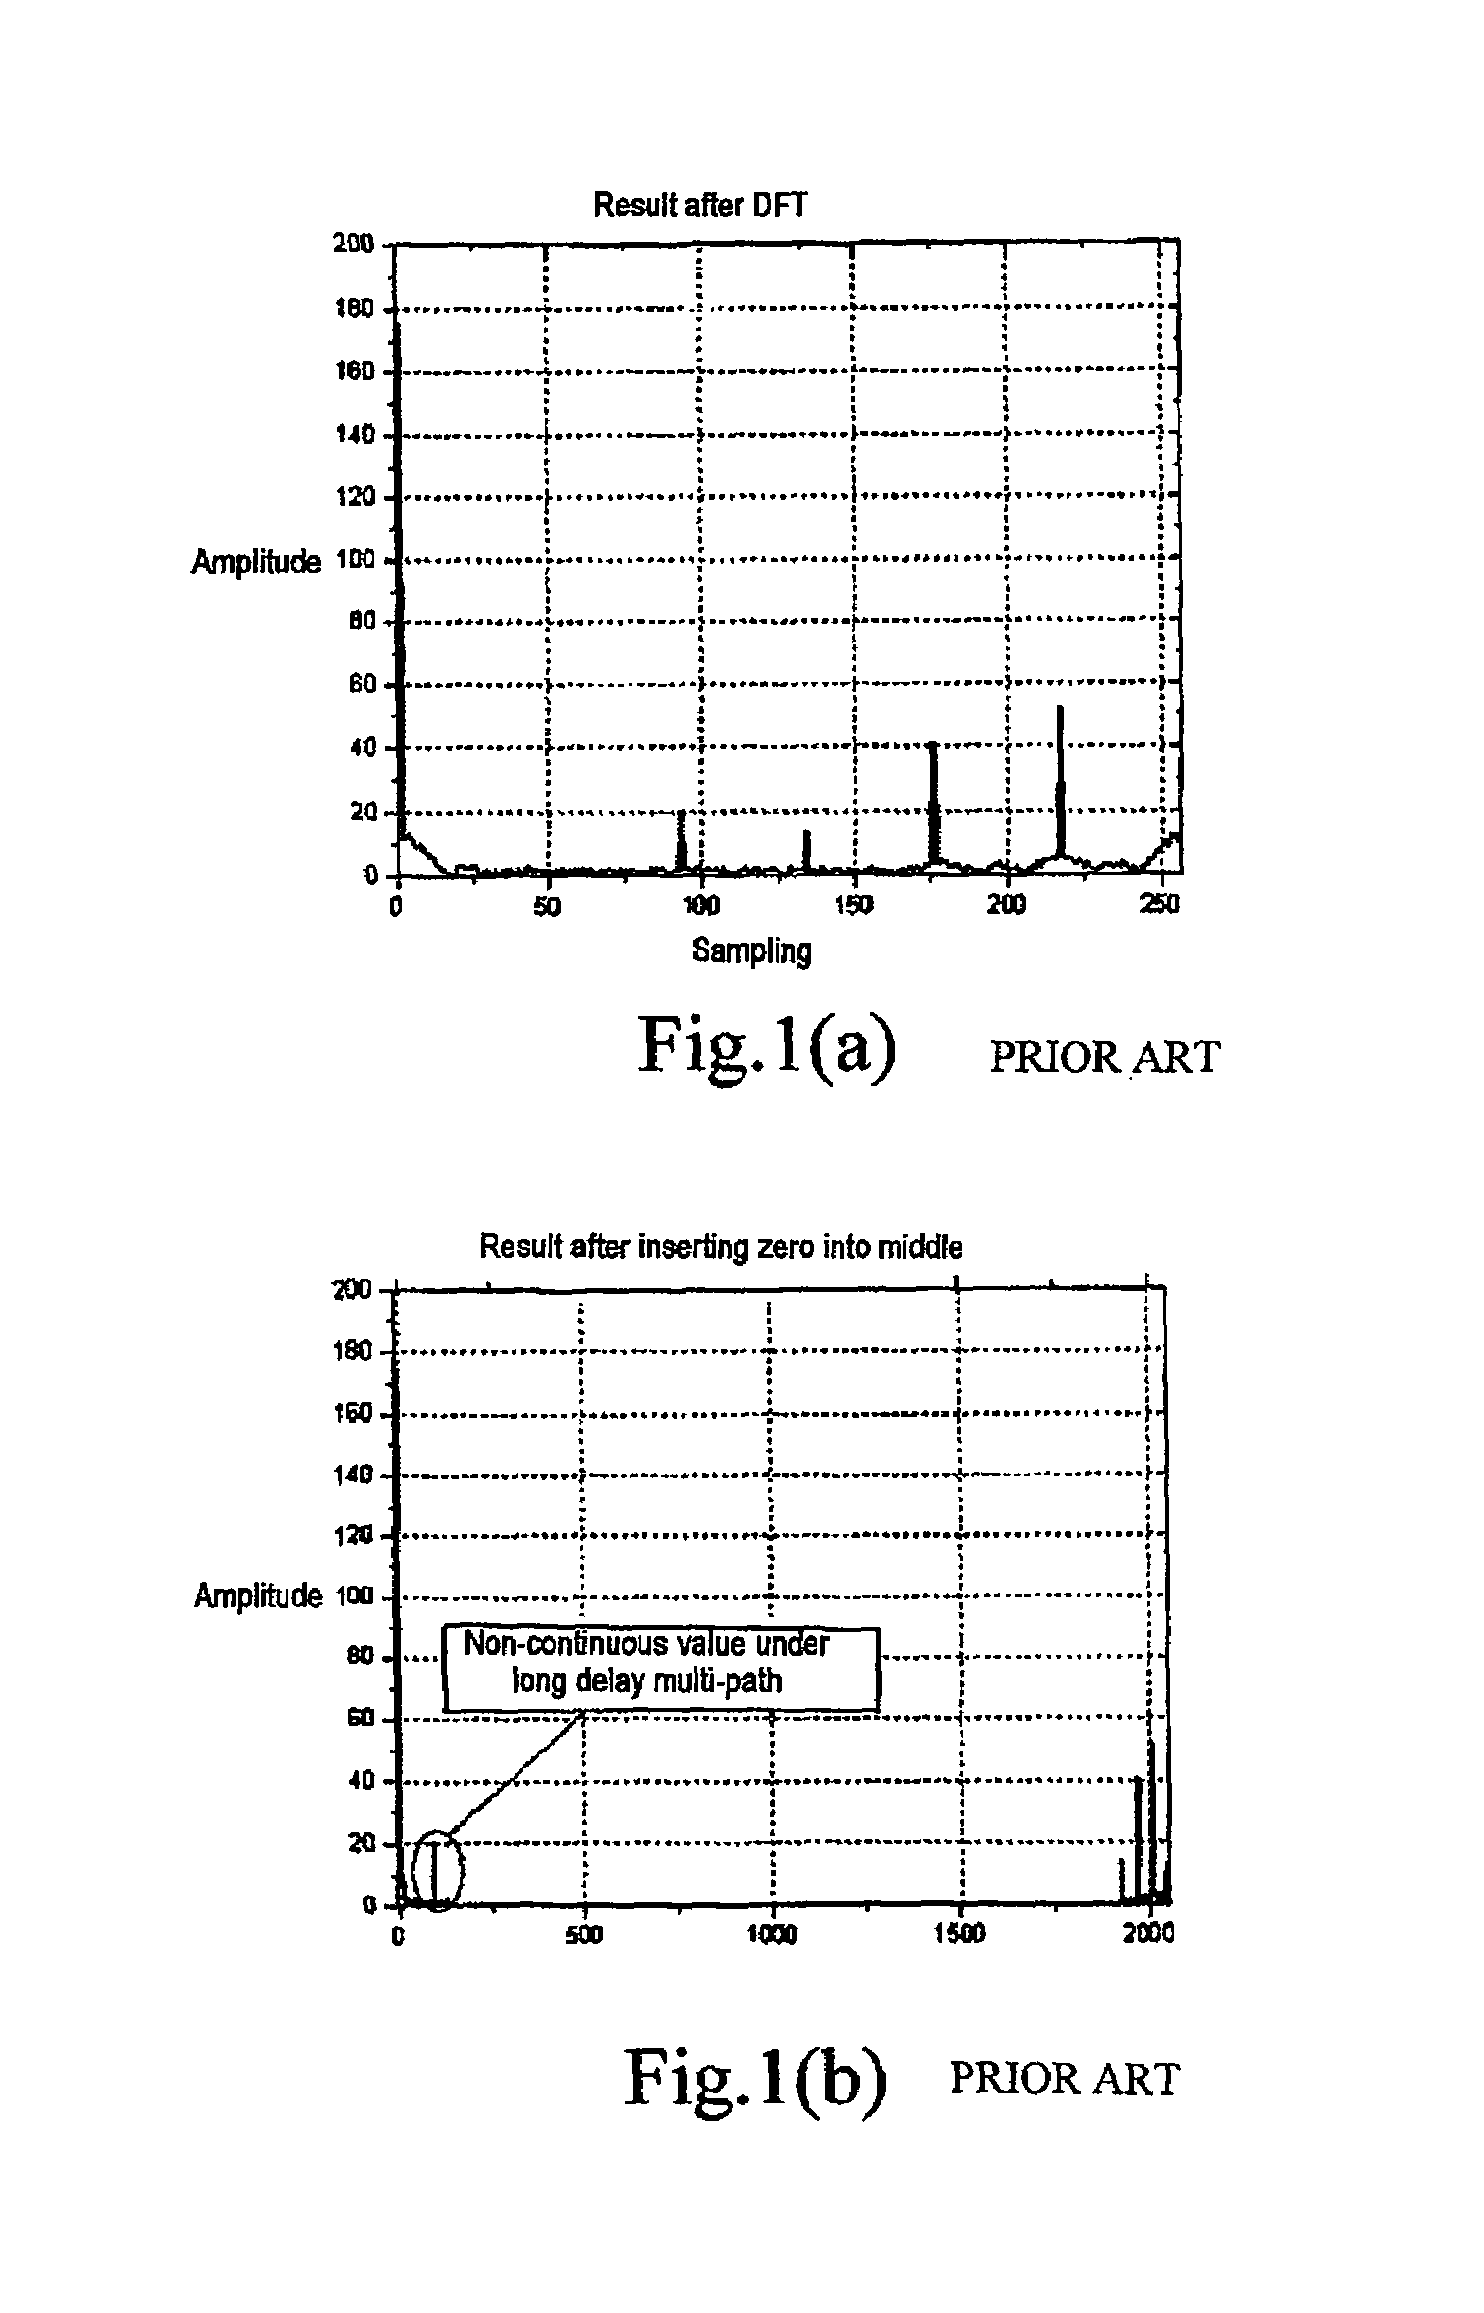 Feedback-type channel estimation method and a device based on a PN sequence and a pilot frequency in an OFDM system